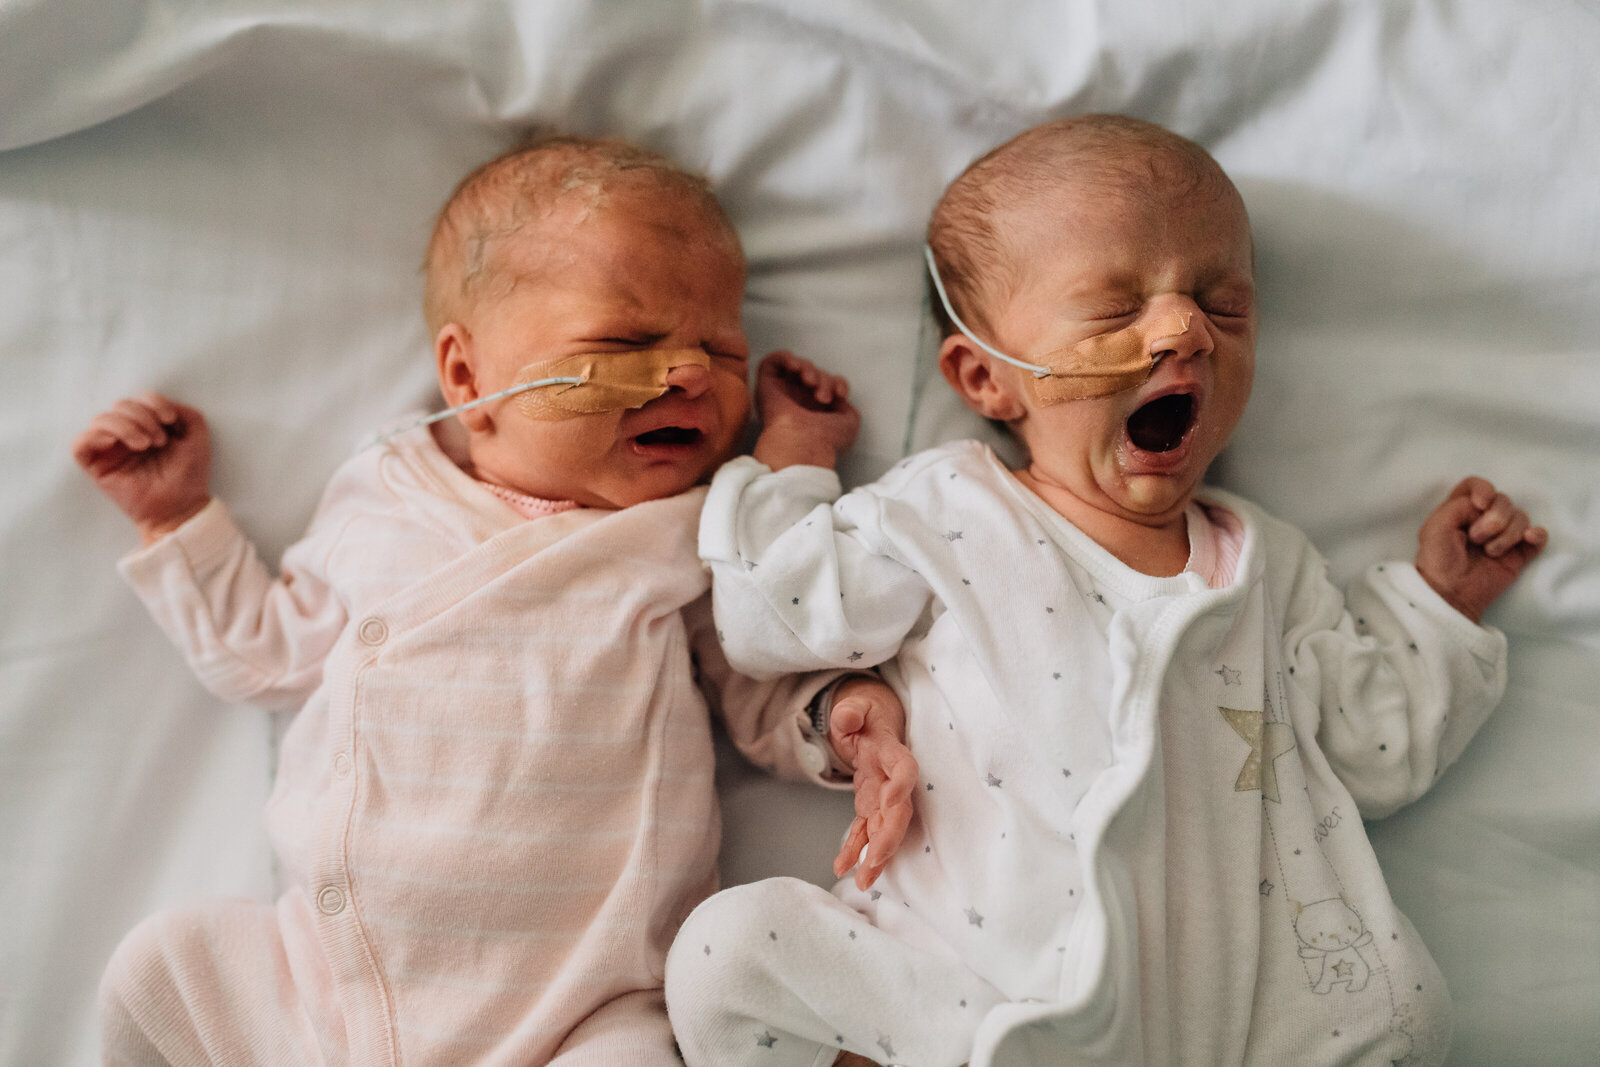 newborn twins In hospital Fresh 48 photography Melbourne And So I Don’t Forget Photography